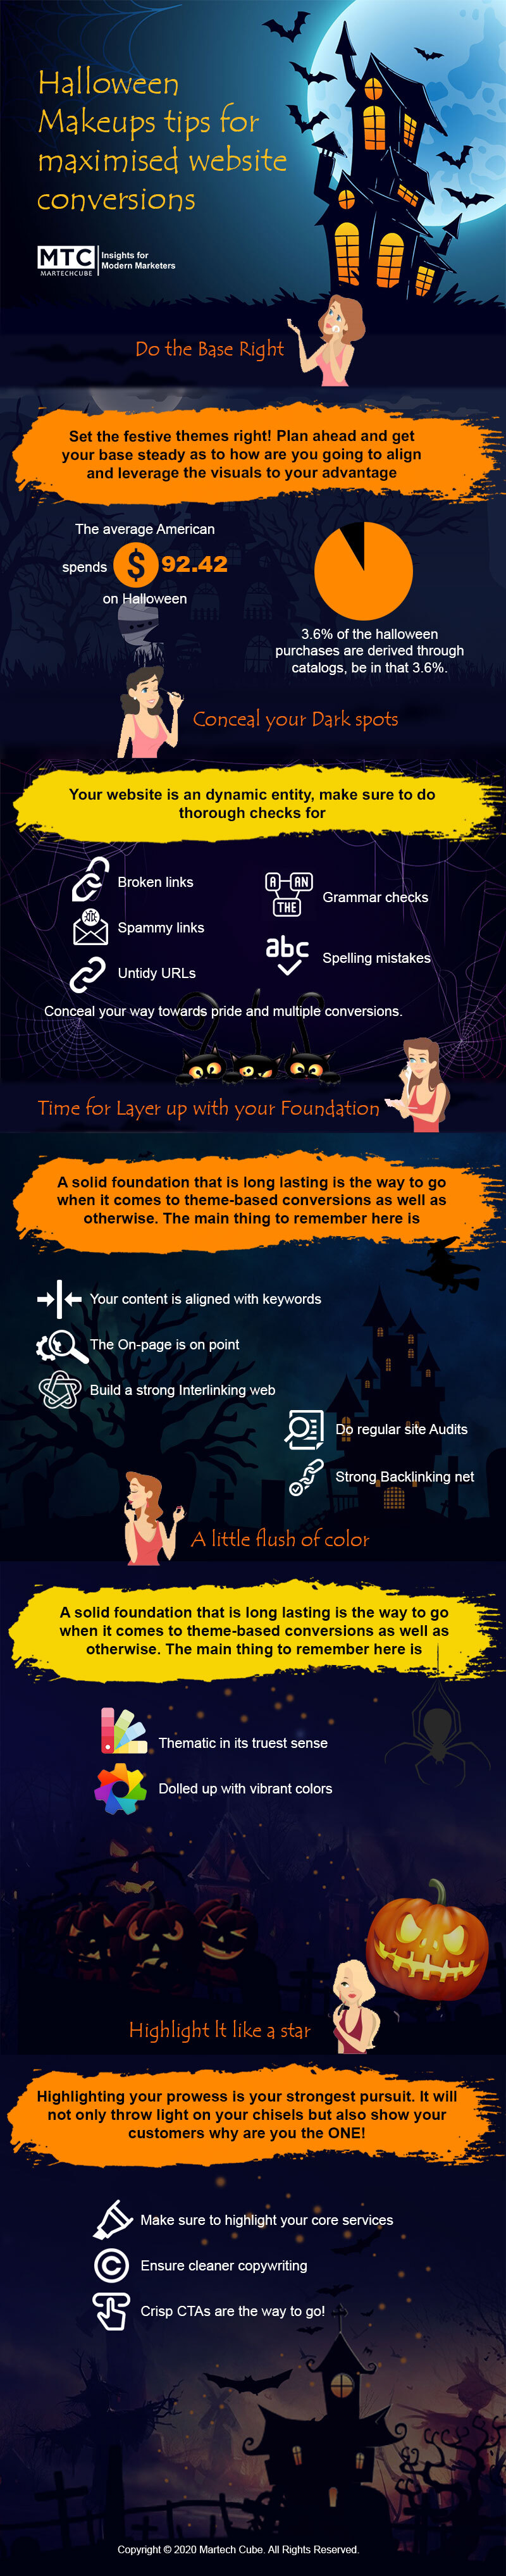 Halloween Makeup Tips for Maximized Website Conversions